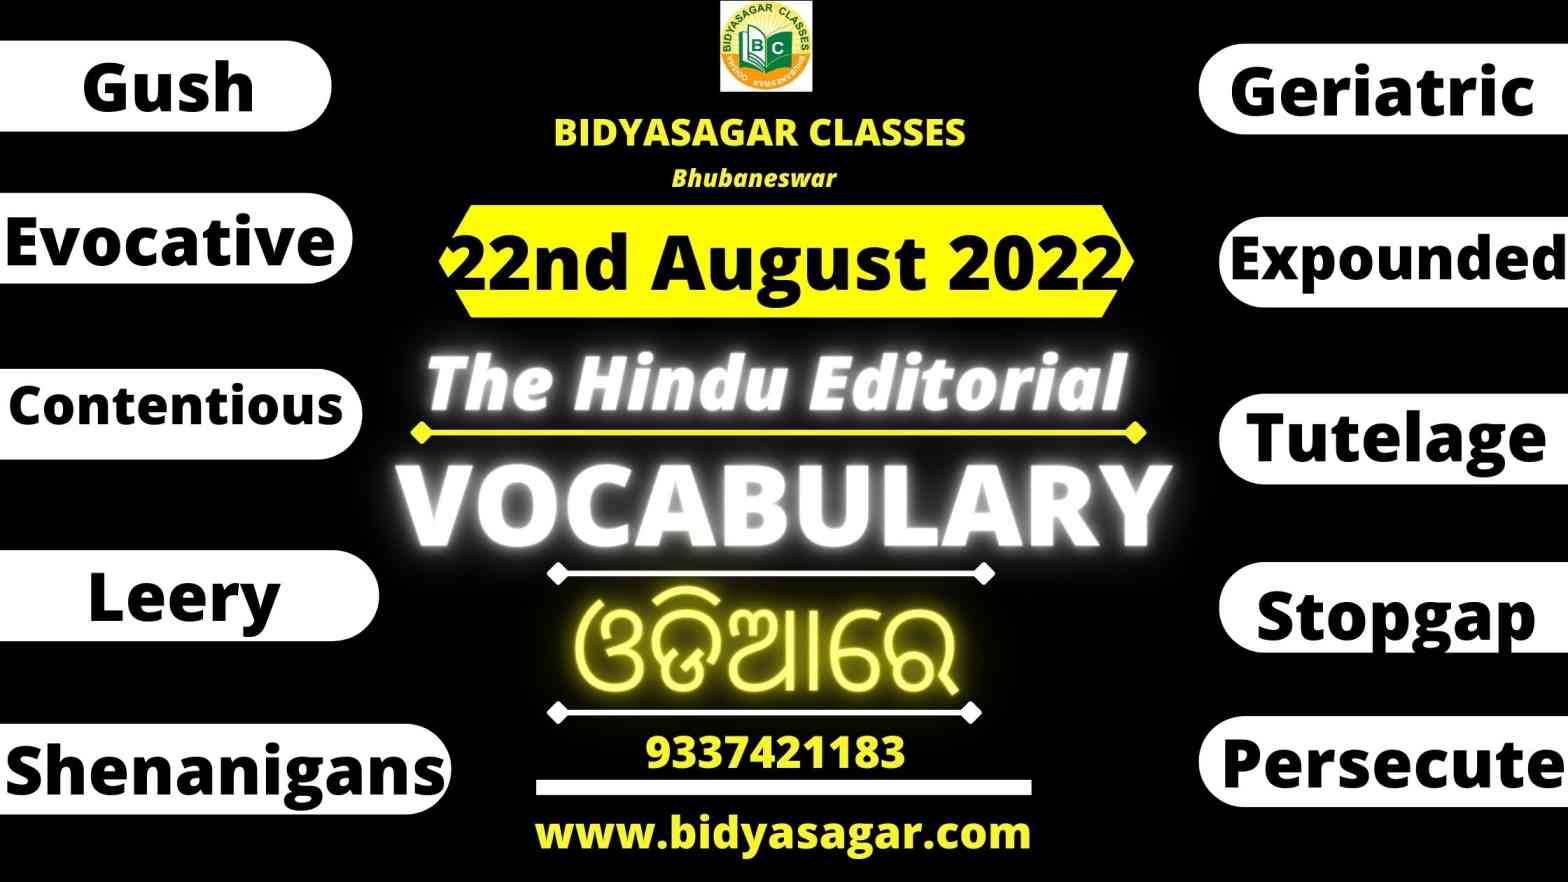 The Hindu Editorial Vocabulary of 22nd August 2022